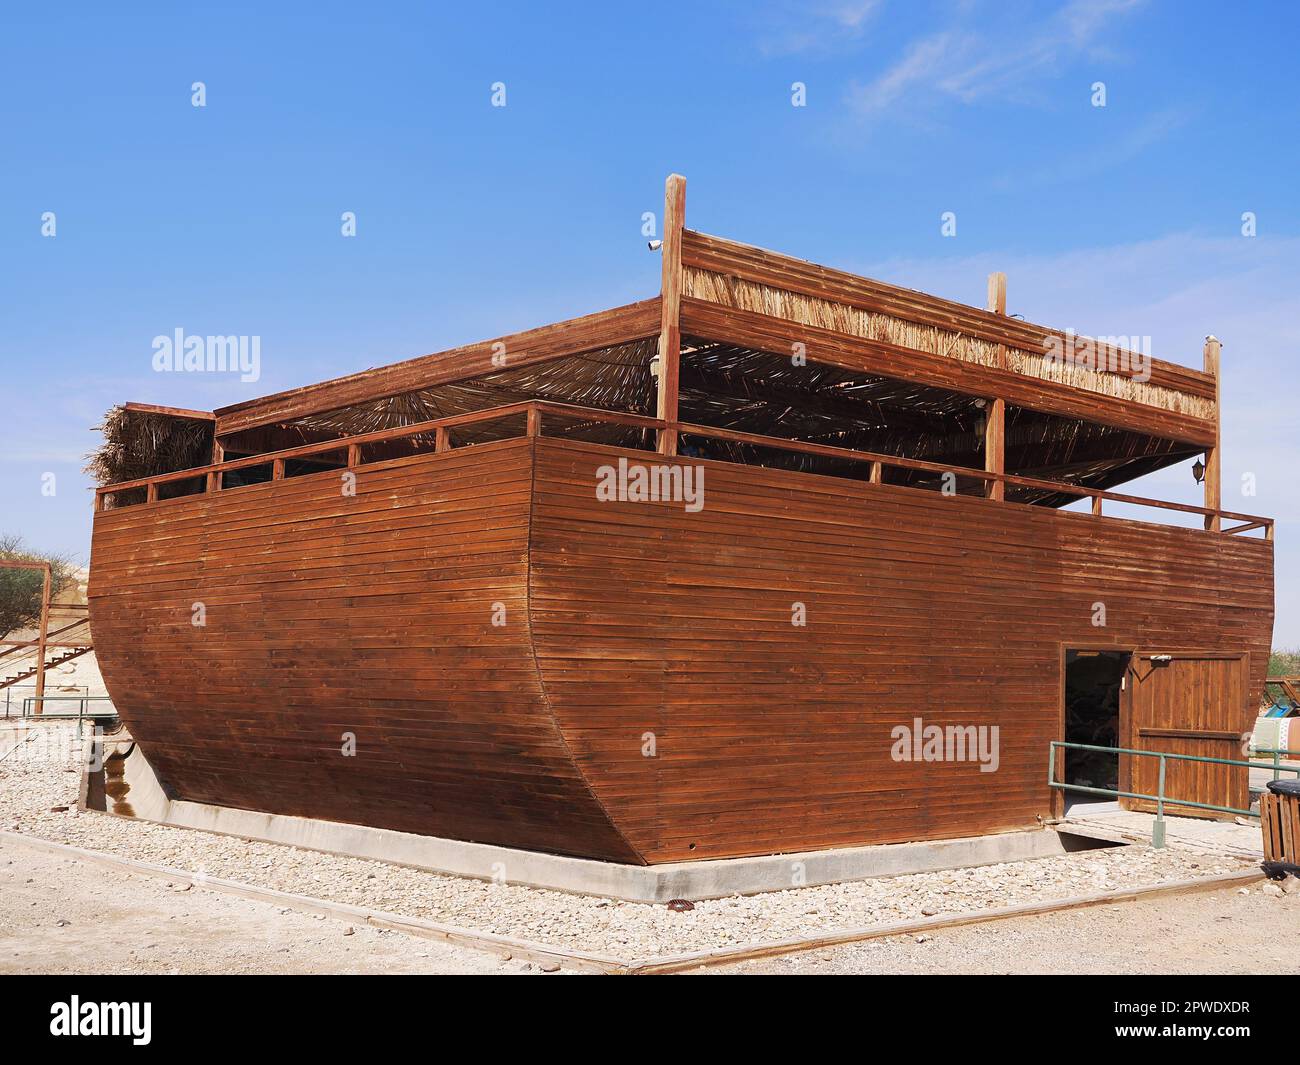 Noah's Ark. Imitation. Built in an Israeli nature reserve on a roe deer and deer farm. It is a favorite place for children and adults, as it contains Stock Photo